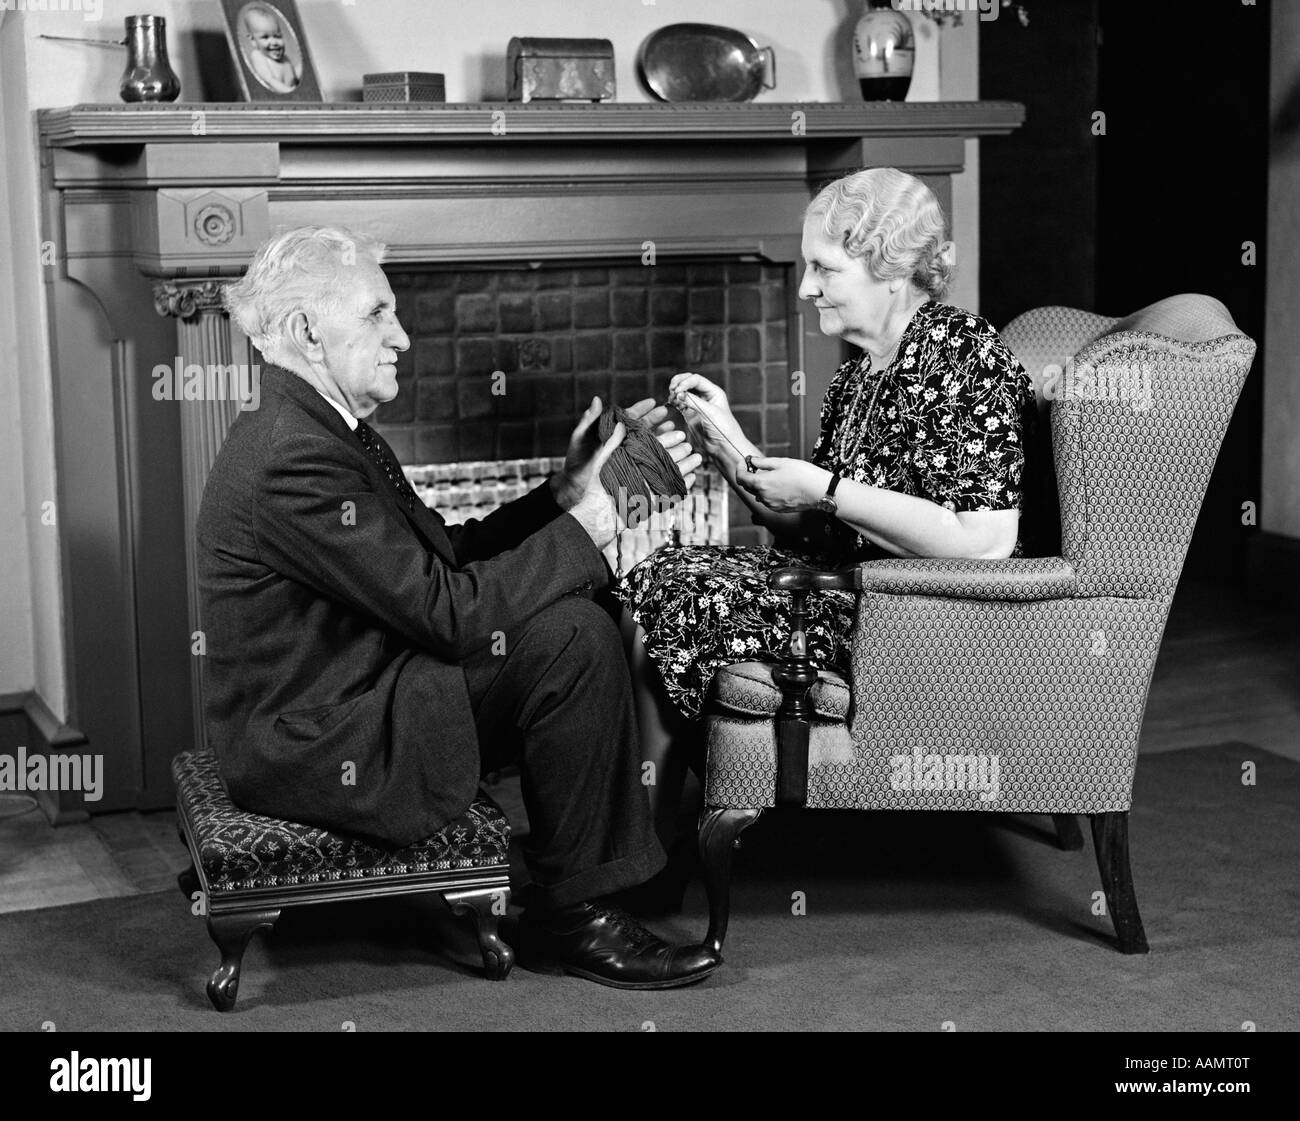 1940s SIDE VIEW OF ELDERLY MAN ON STOOL HOLDING HANDS OUT FOR WIFE IN CHAIR OPPOSITE HIM TO WRAP YARN FOR KNITTING Stock Photo